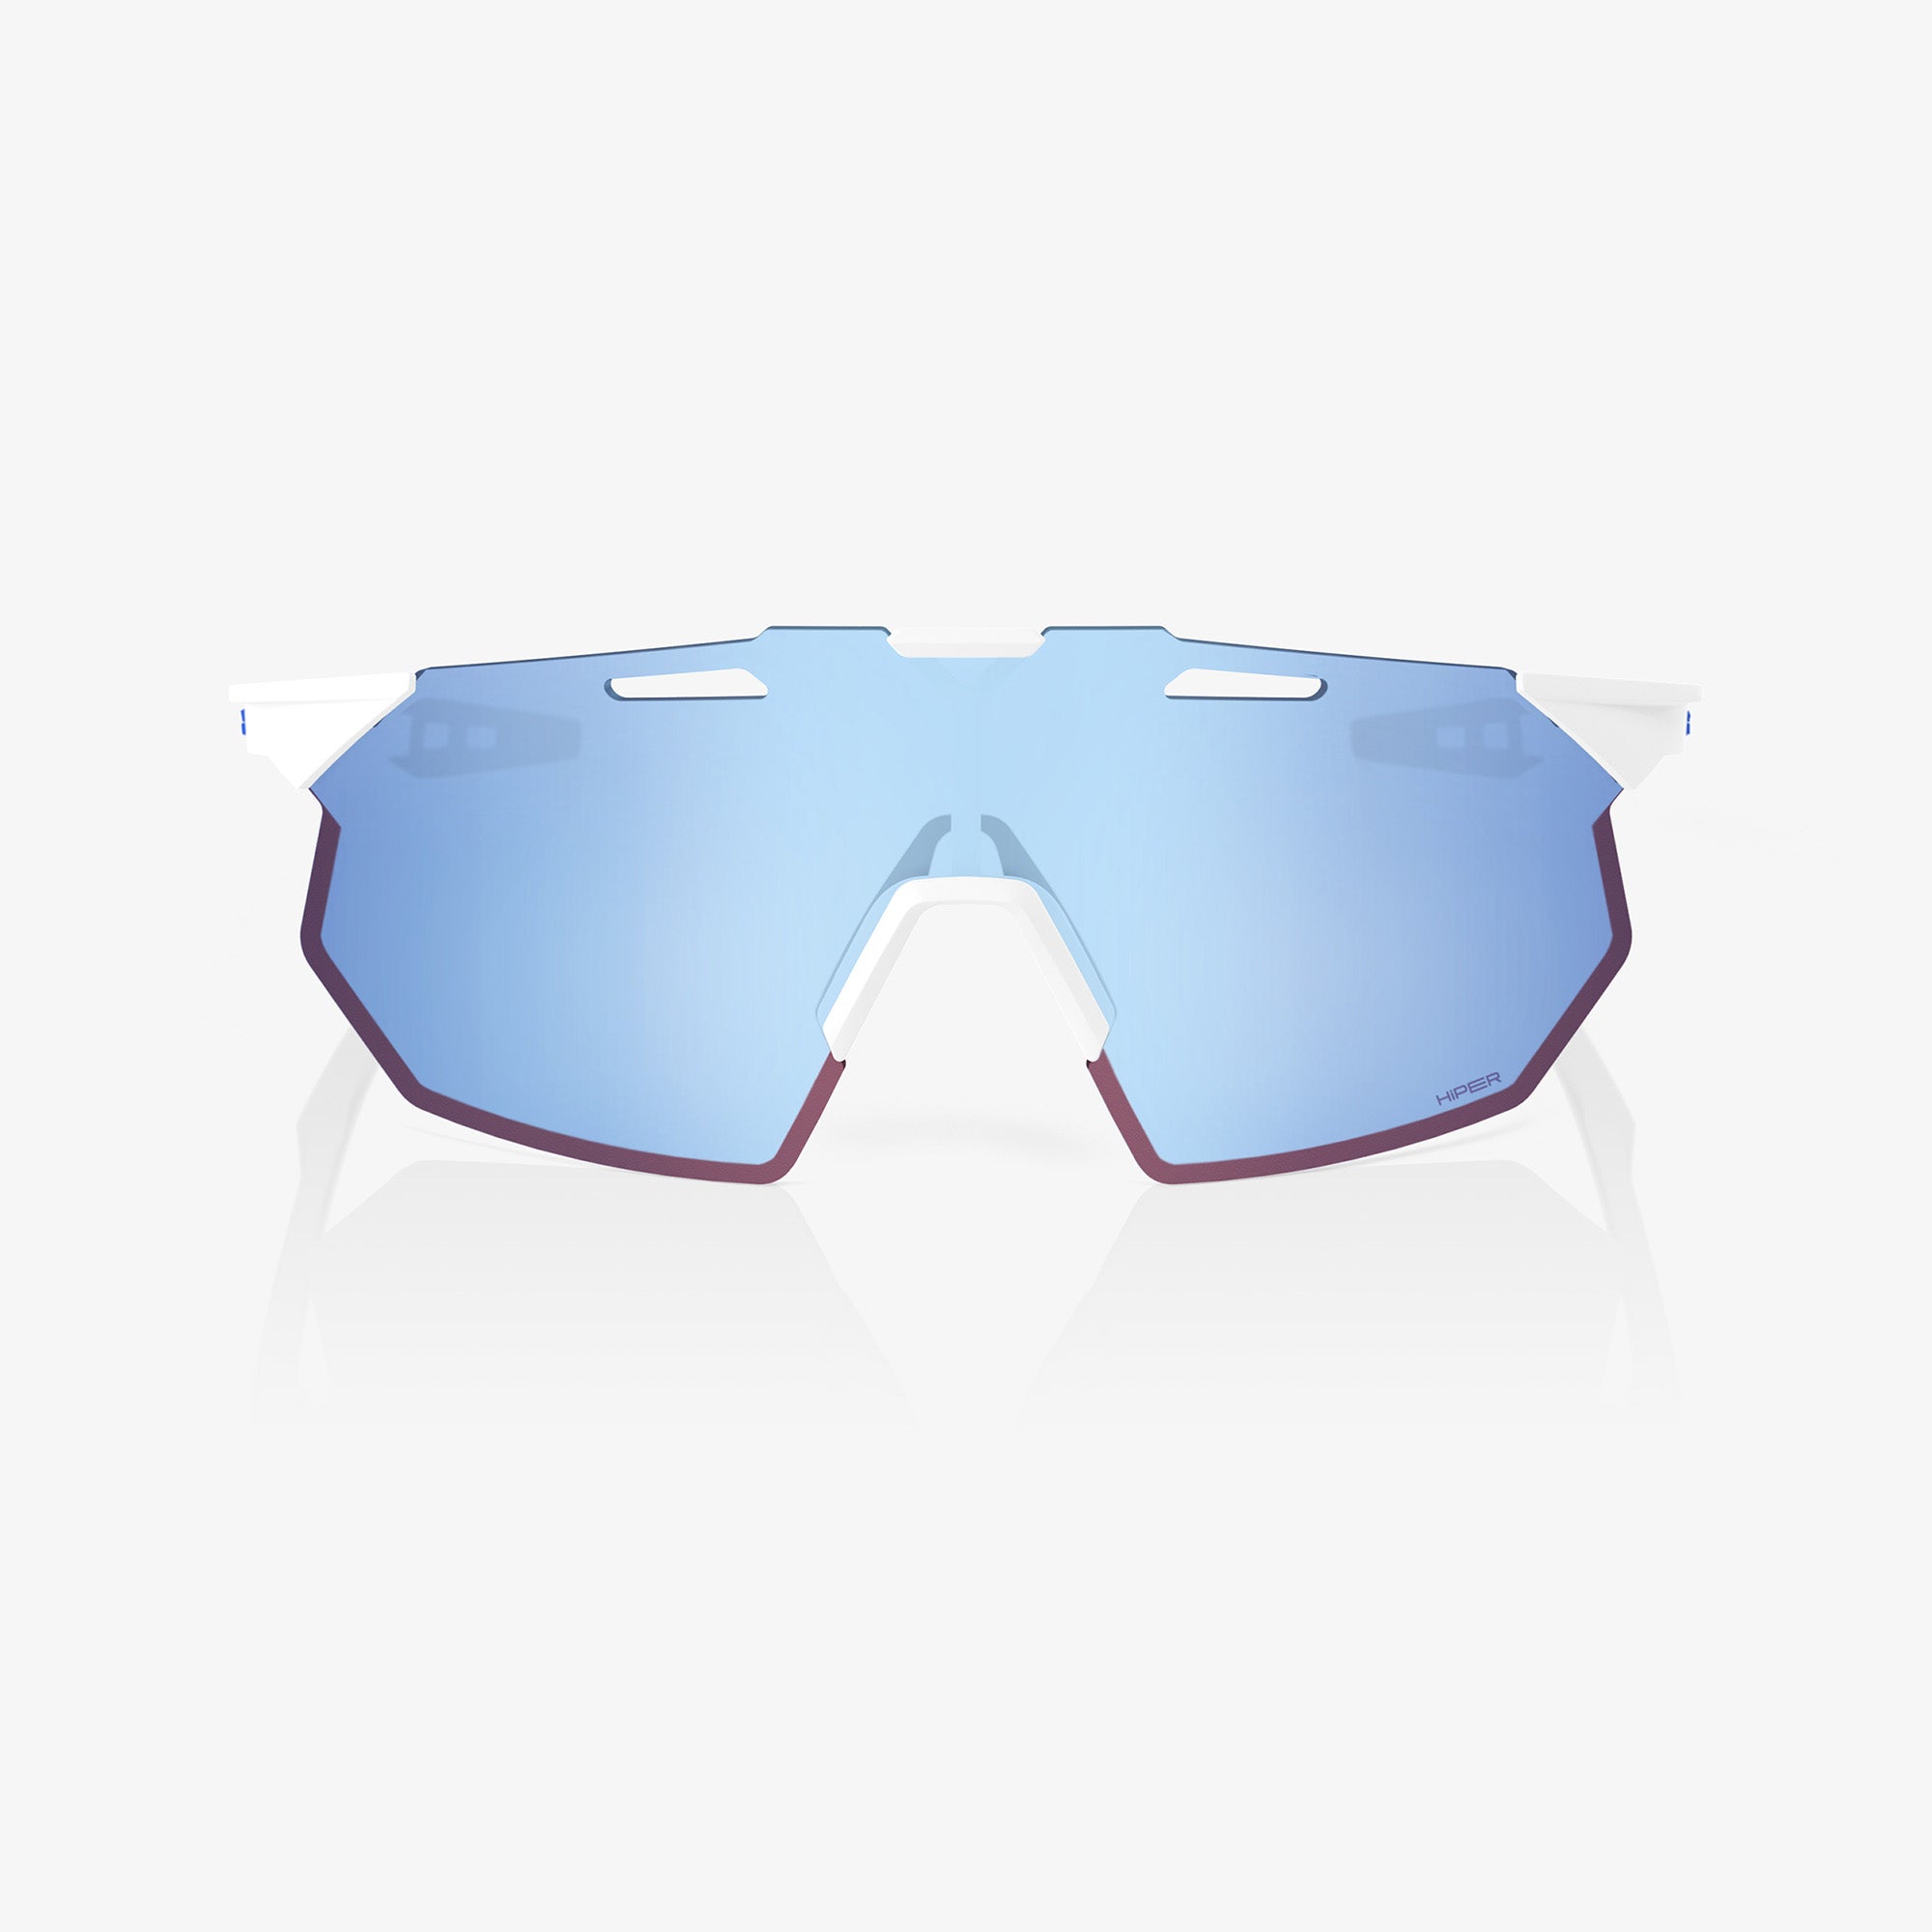 HYPERCRAFT® SQ Soft Tact White - HiPER® Blue Multilayer Lens - Secondary